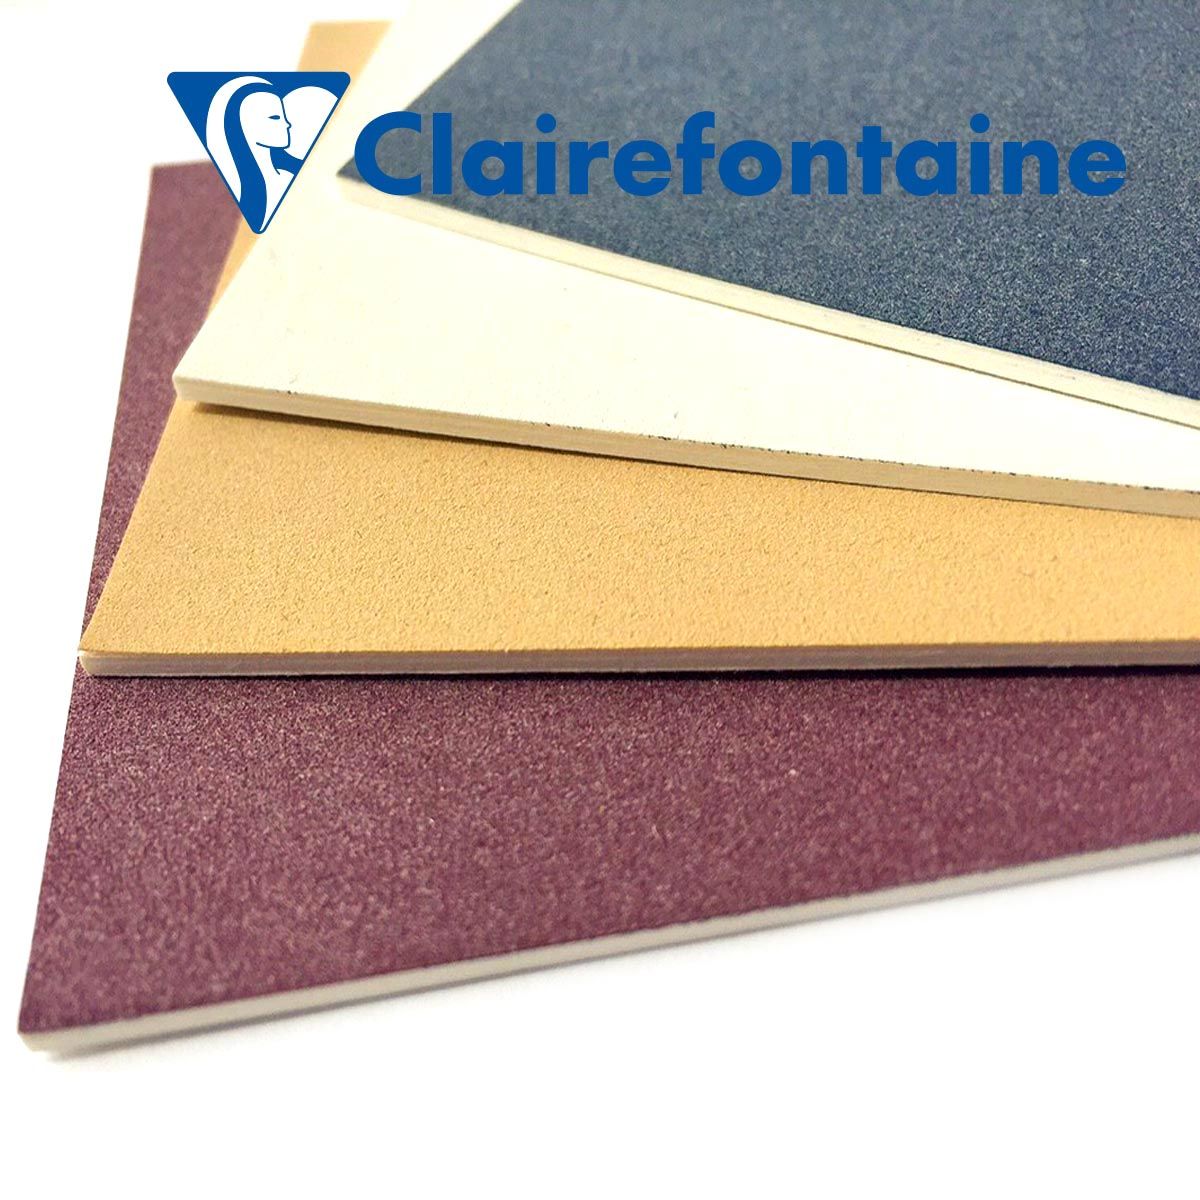 Clairefontaine Pastelmat Mounted Boards 19.5 x 27.5 in (50x70cm)